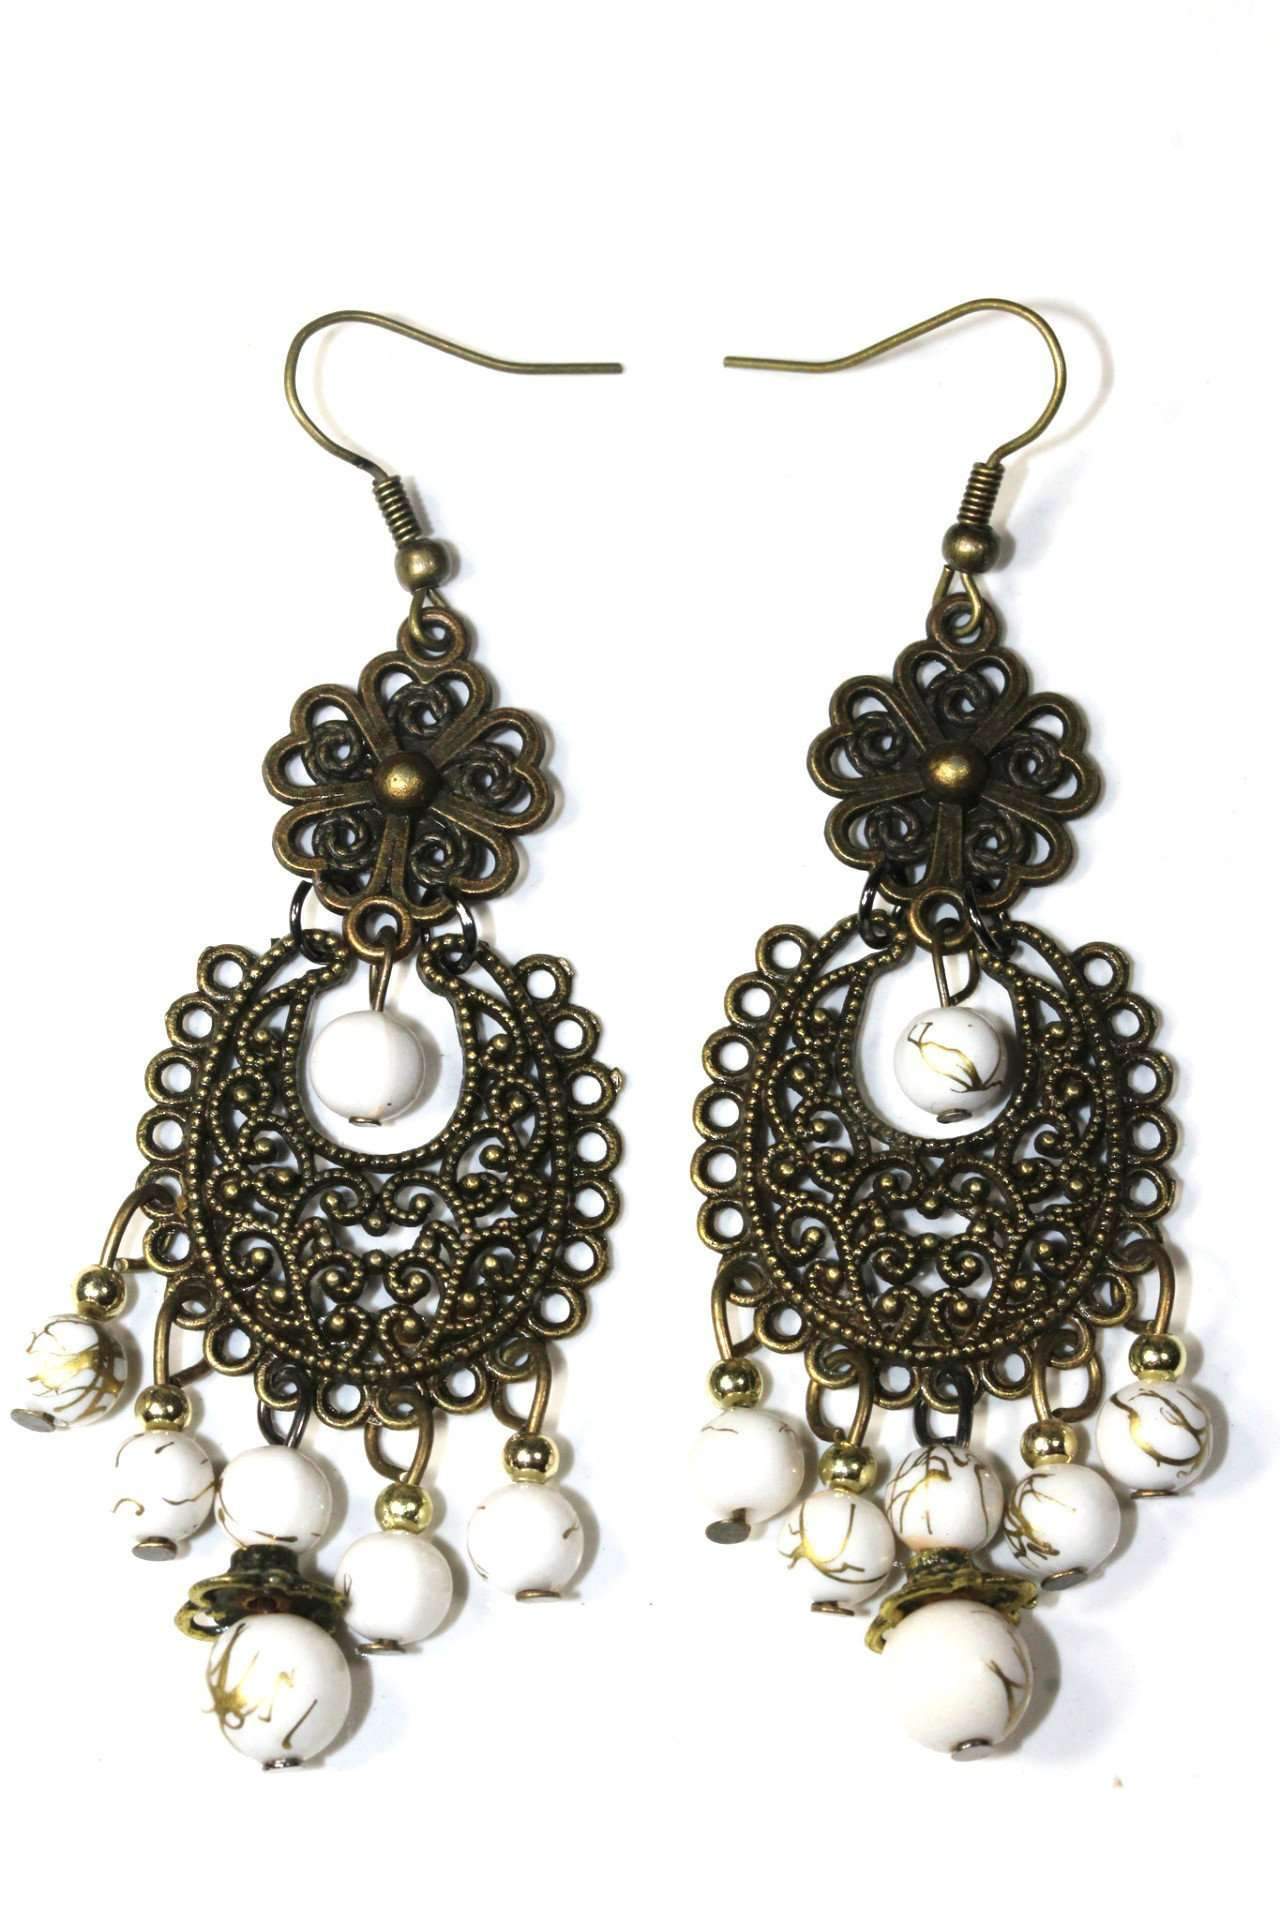 A pair of Grand Boheme Filigree Dangle Earrings with small white bead accents hanging on a white background.